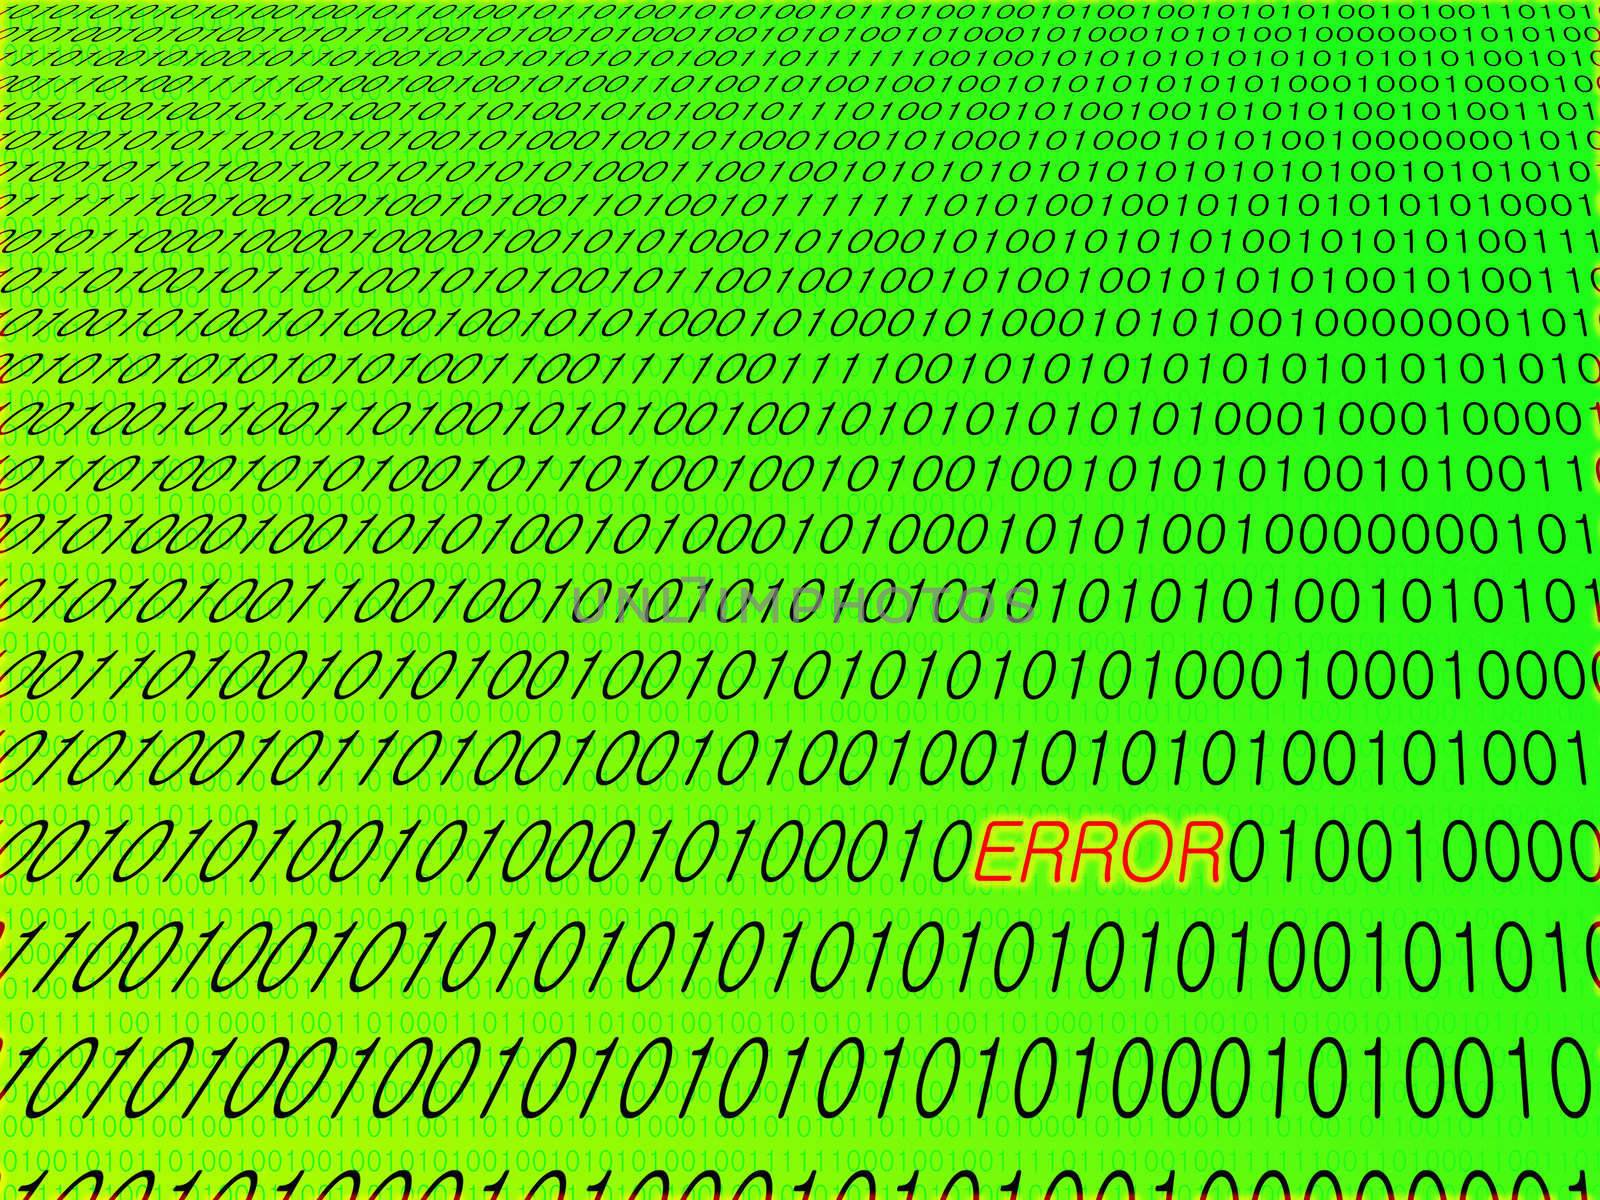 Binary digits in perspective with ERROR text in red with glow effect. Background is graduating luminous green with darker green smaller binary digits.